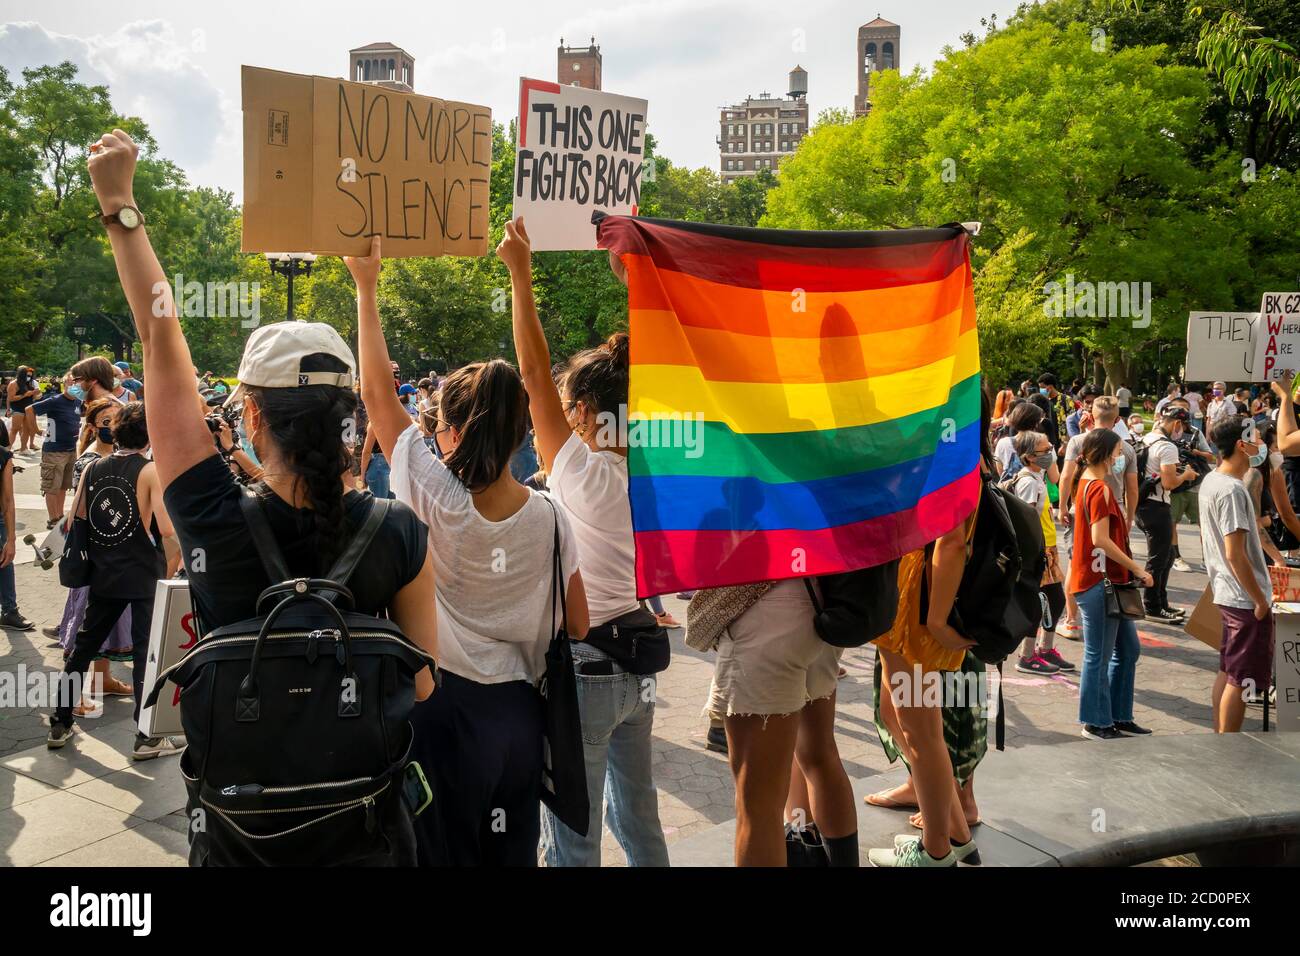 Black Lives Matter demonstrators rally with Asian-Americans, prior to marching, in Washington Square Park in New York protesting the death of George Floyd and discrimination and hate crimes against Asian-Americans, seen on Saturday, August 15, 2020. (© Richard B. Levine) Stock Photo